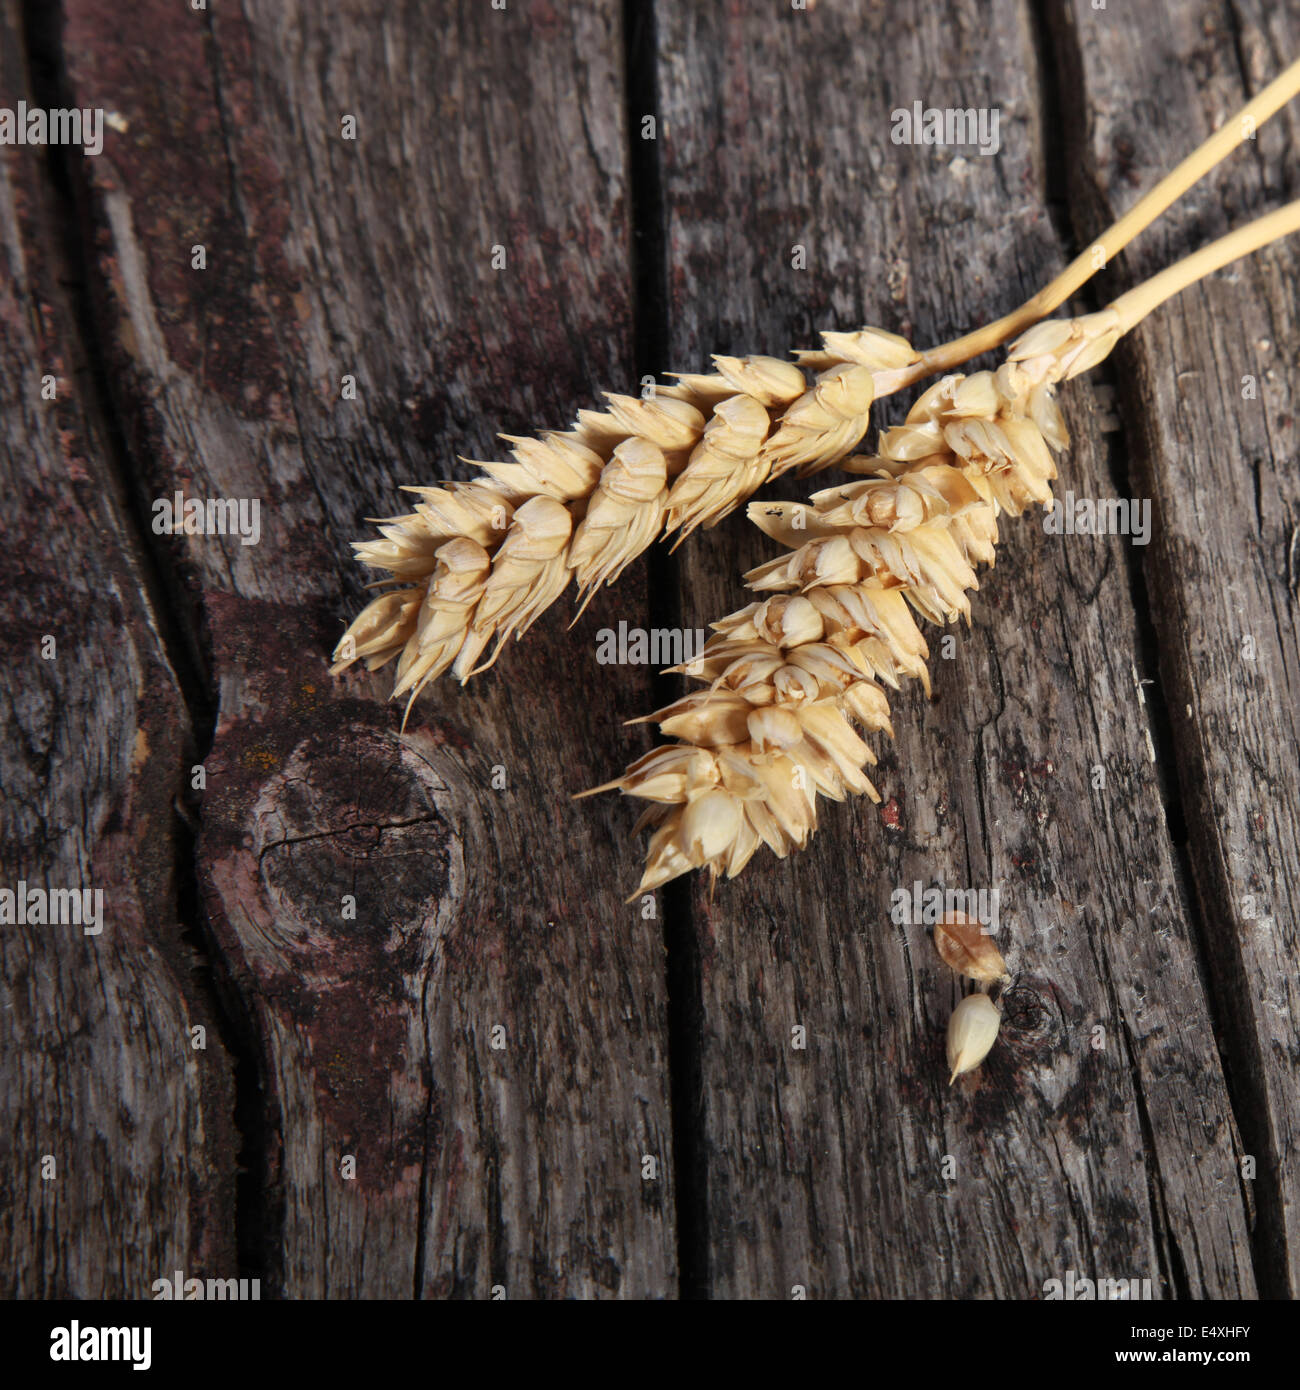 Two ears of ripe wheat Stock Photo